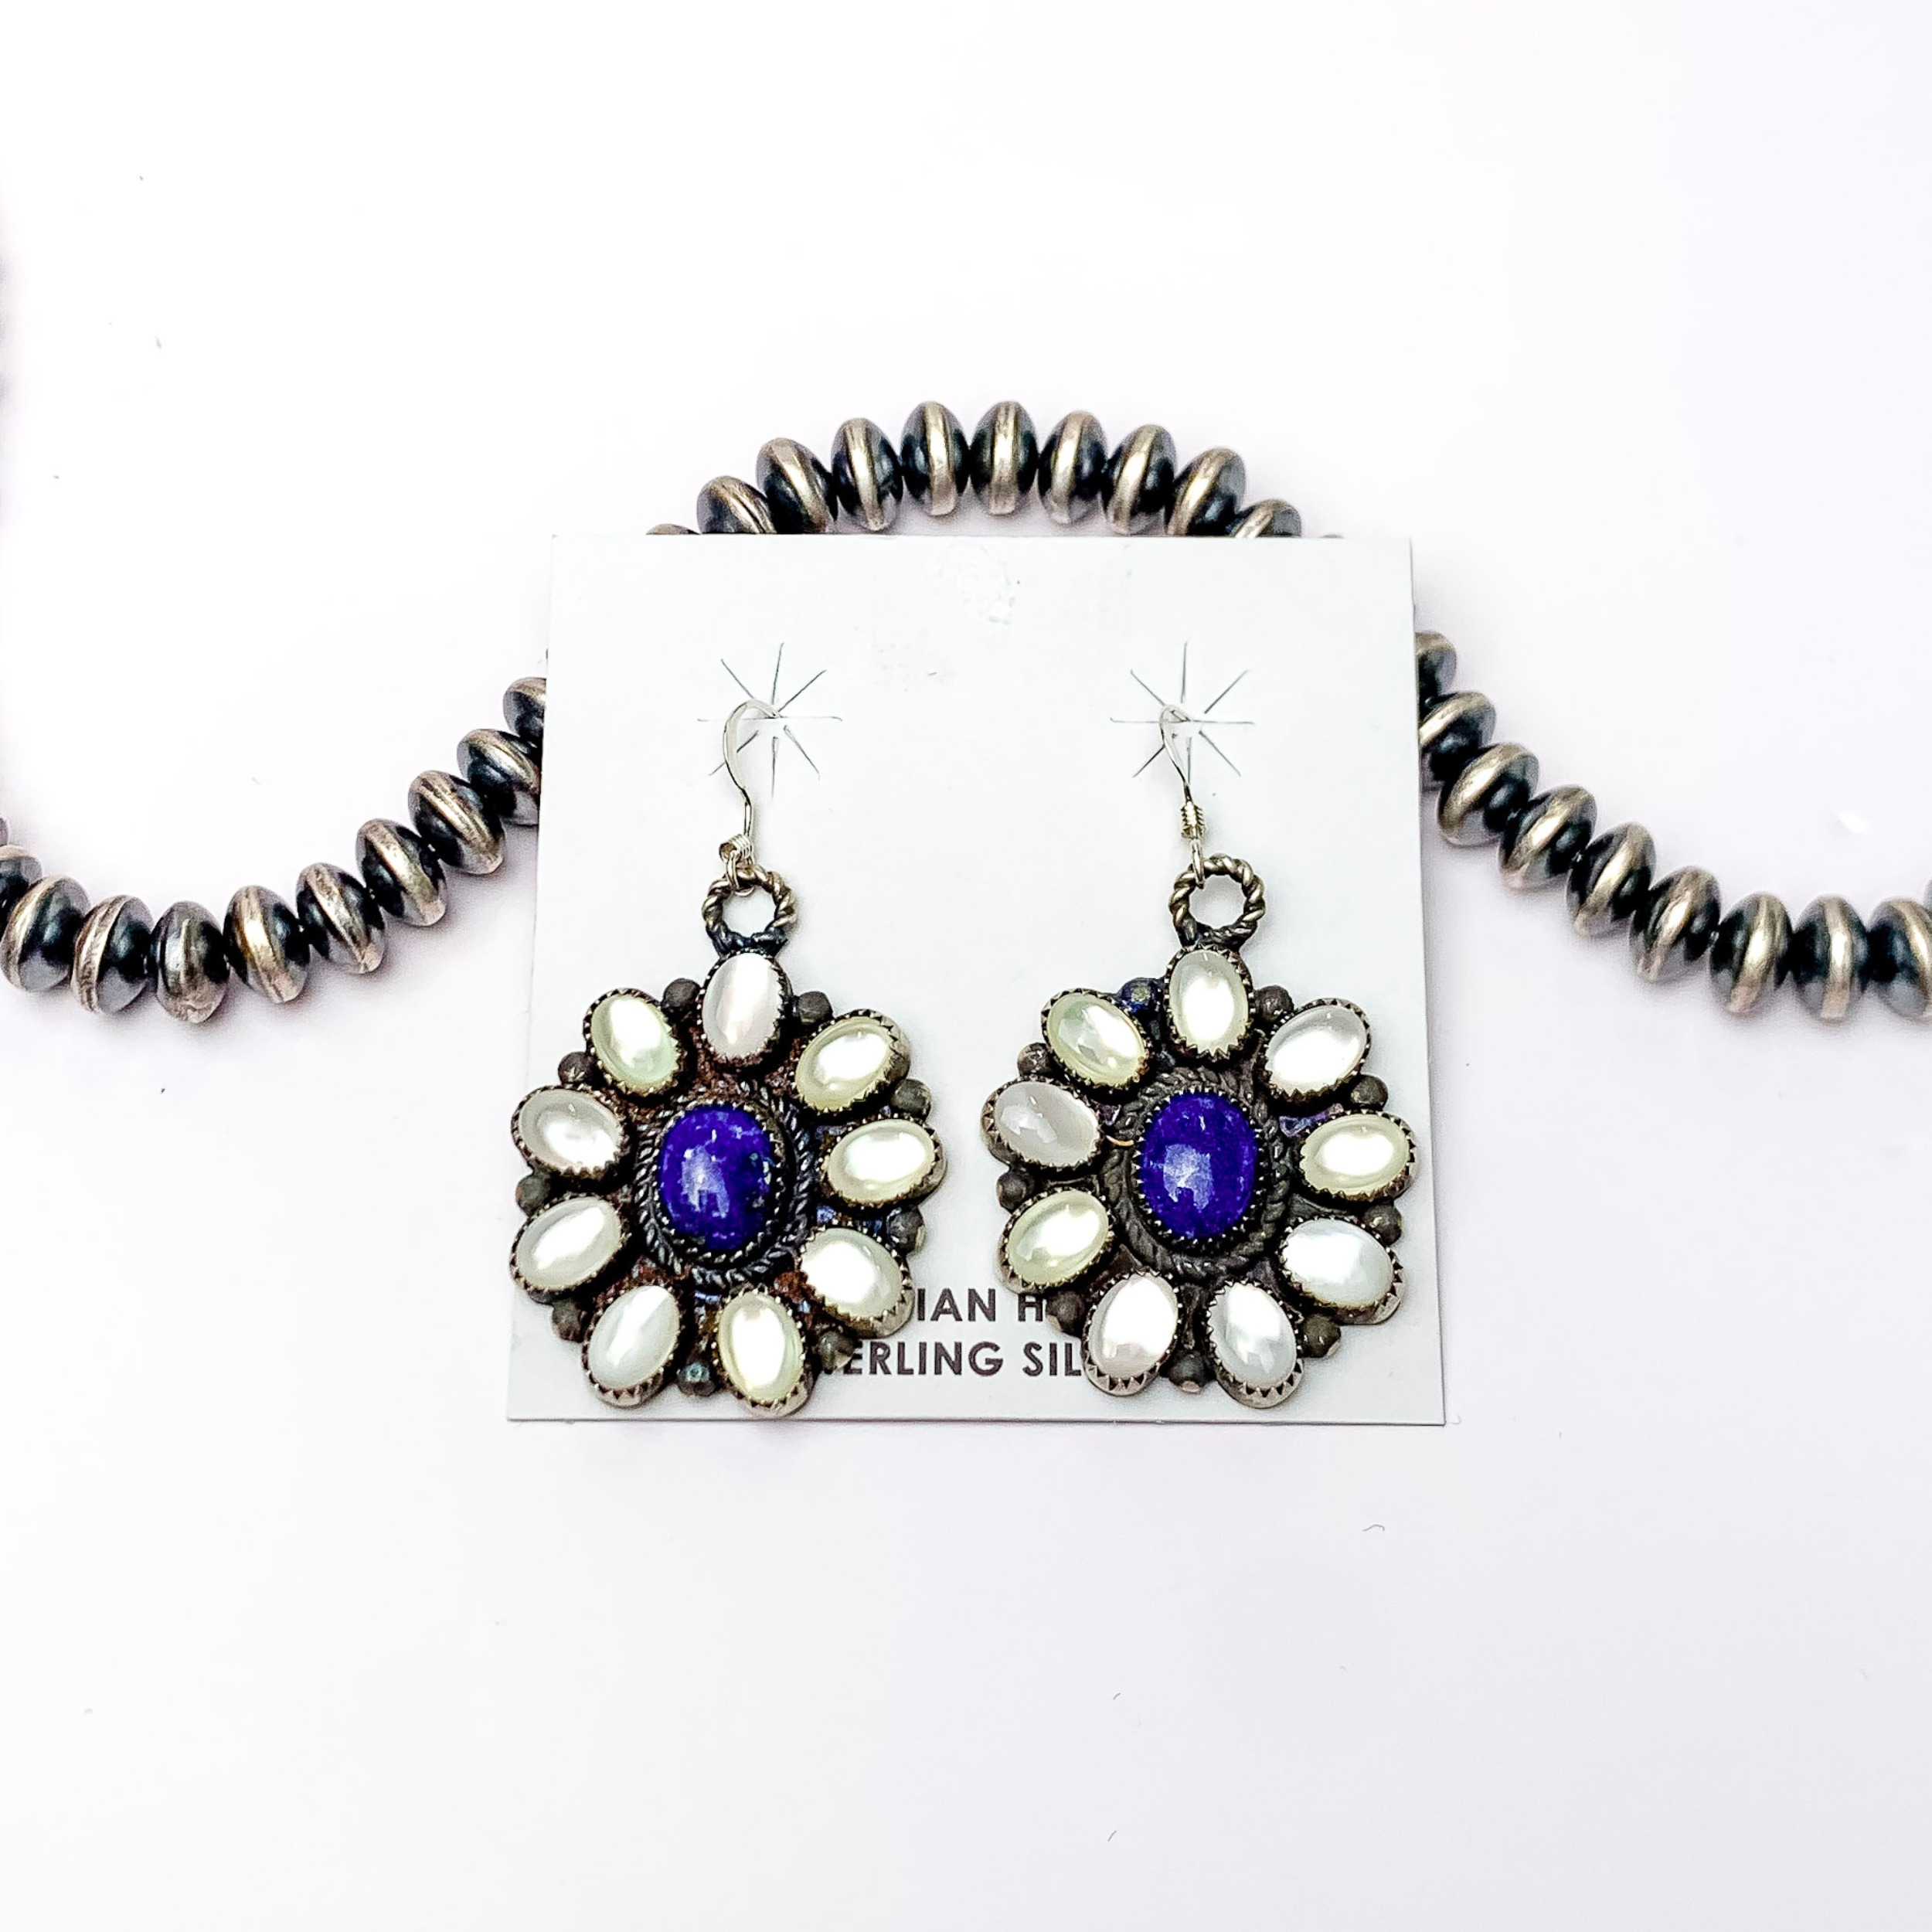 Centered in the picture are sterling silver dangling earrings with a circle cluster of white pearl and Dark lapis center with a white background.  